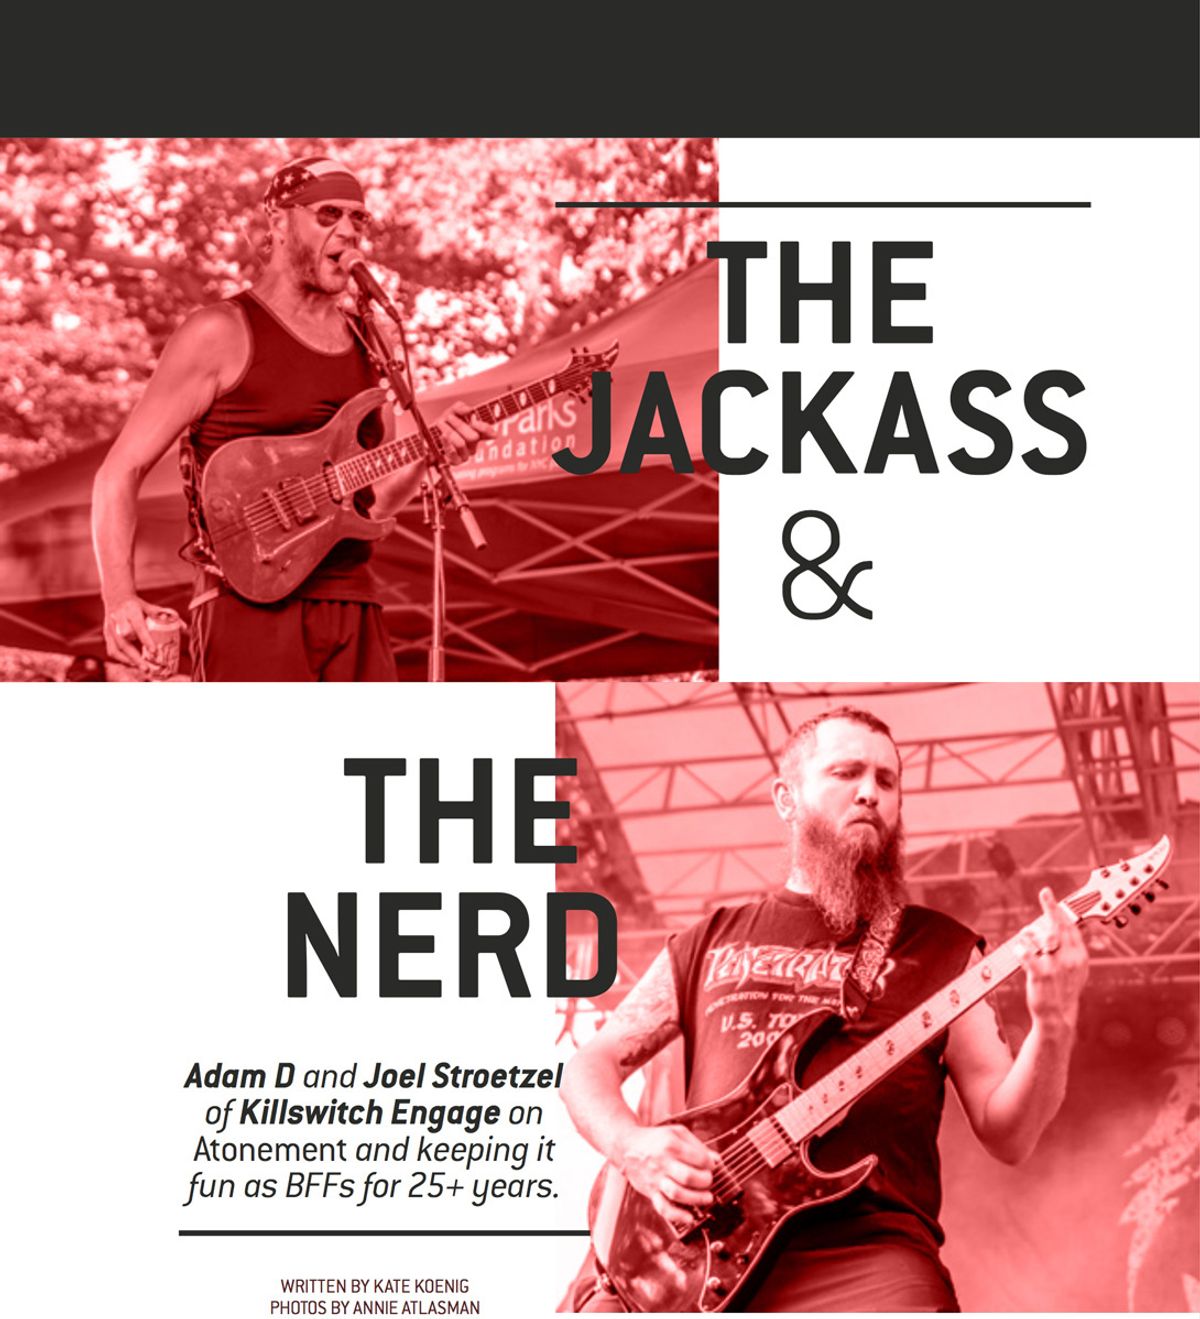 Killswitch Engage: The Jackass & the Nerd